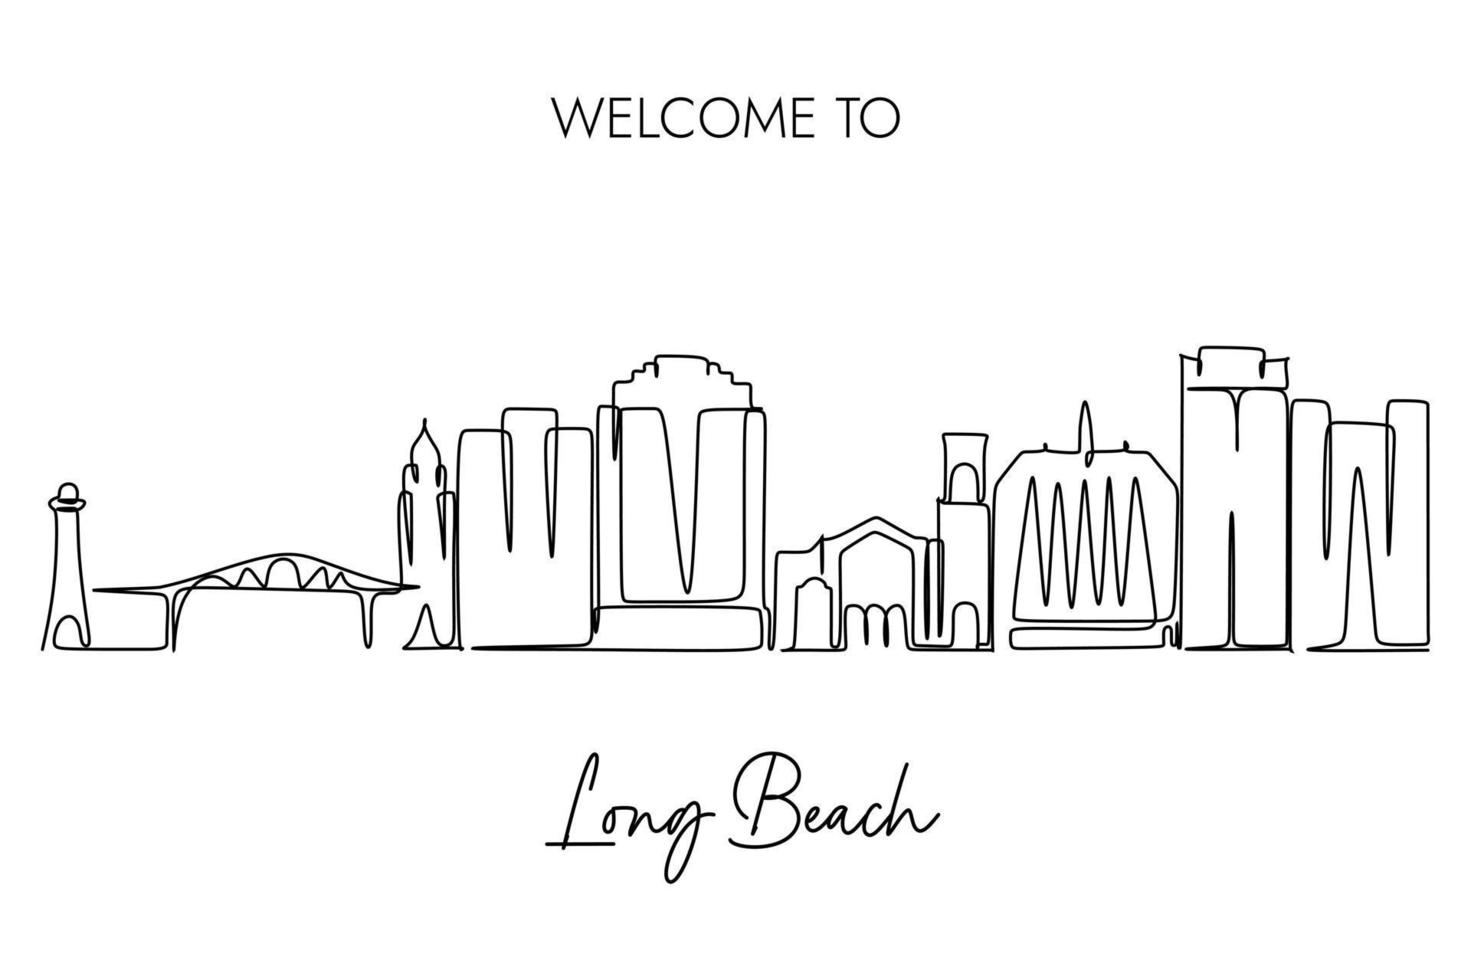 One continuous line drawing of Long Beach City Skyline. Simple line art hand drawn style design vector illustration for tourism campaign concept